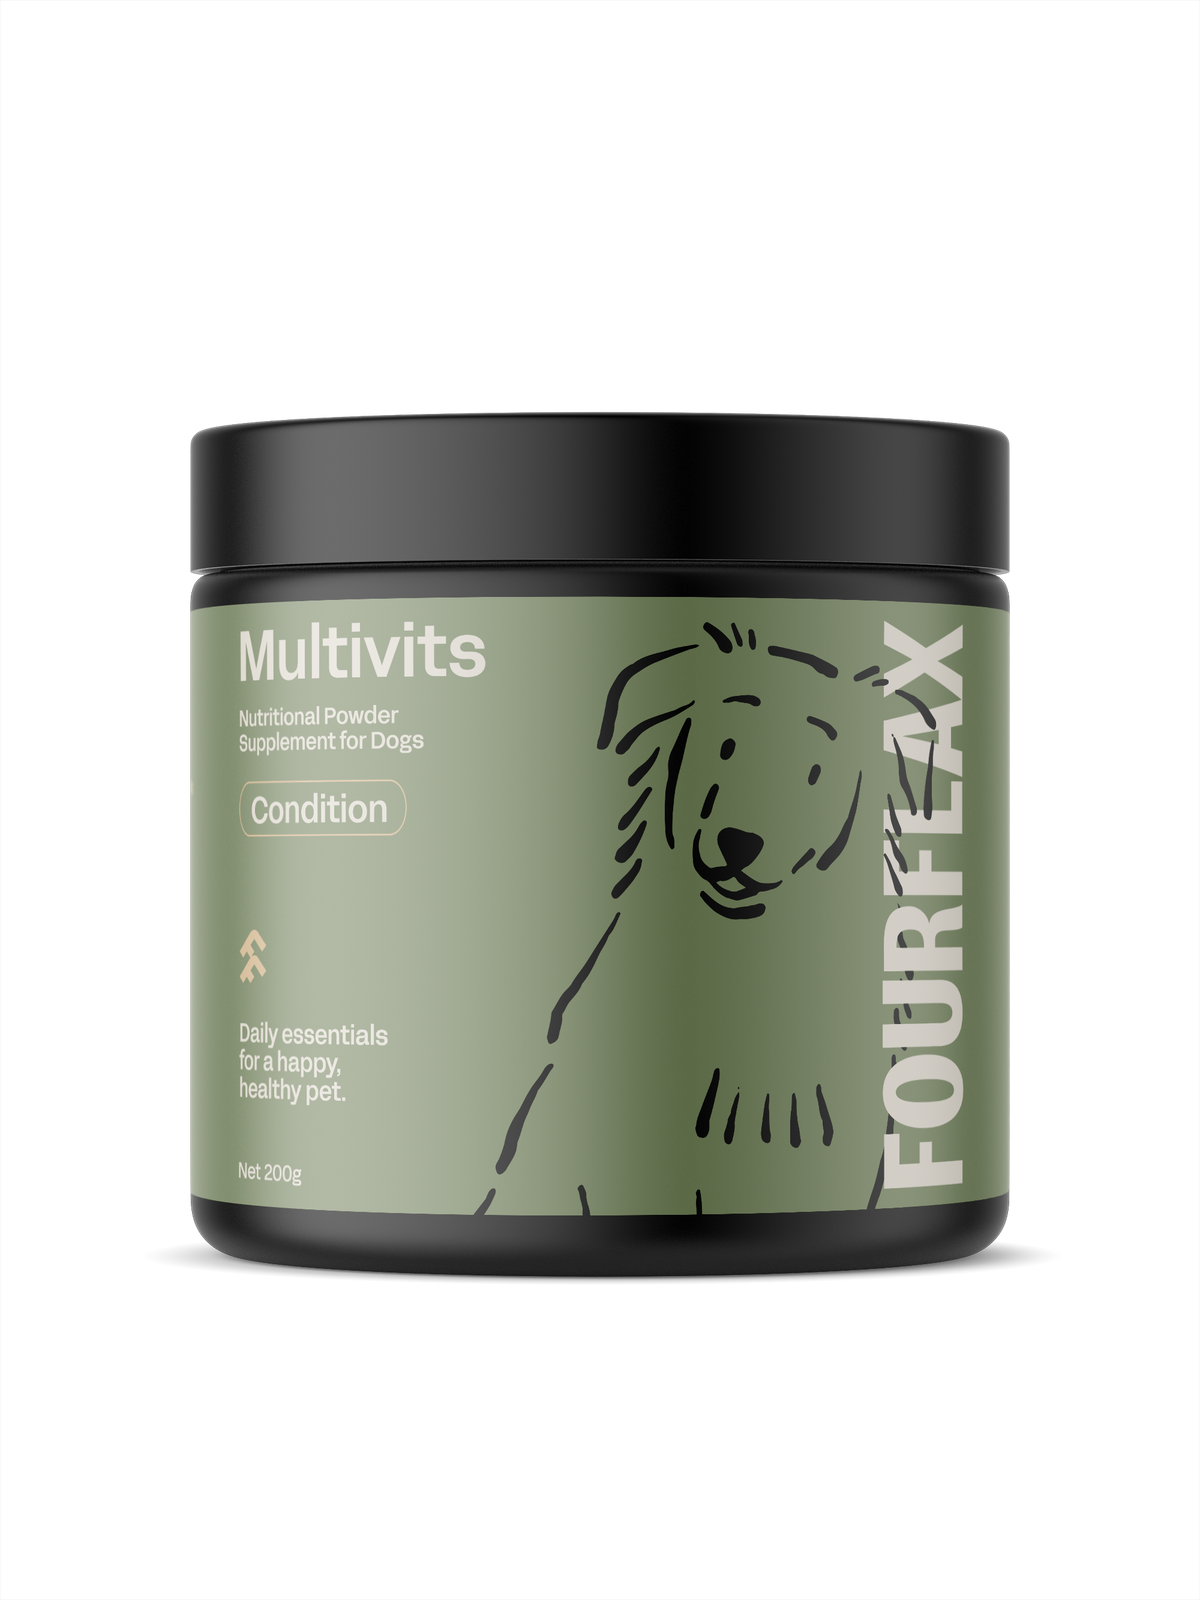 Fourflax multivitamins for dogs